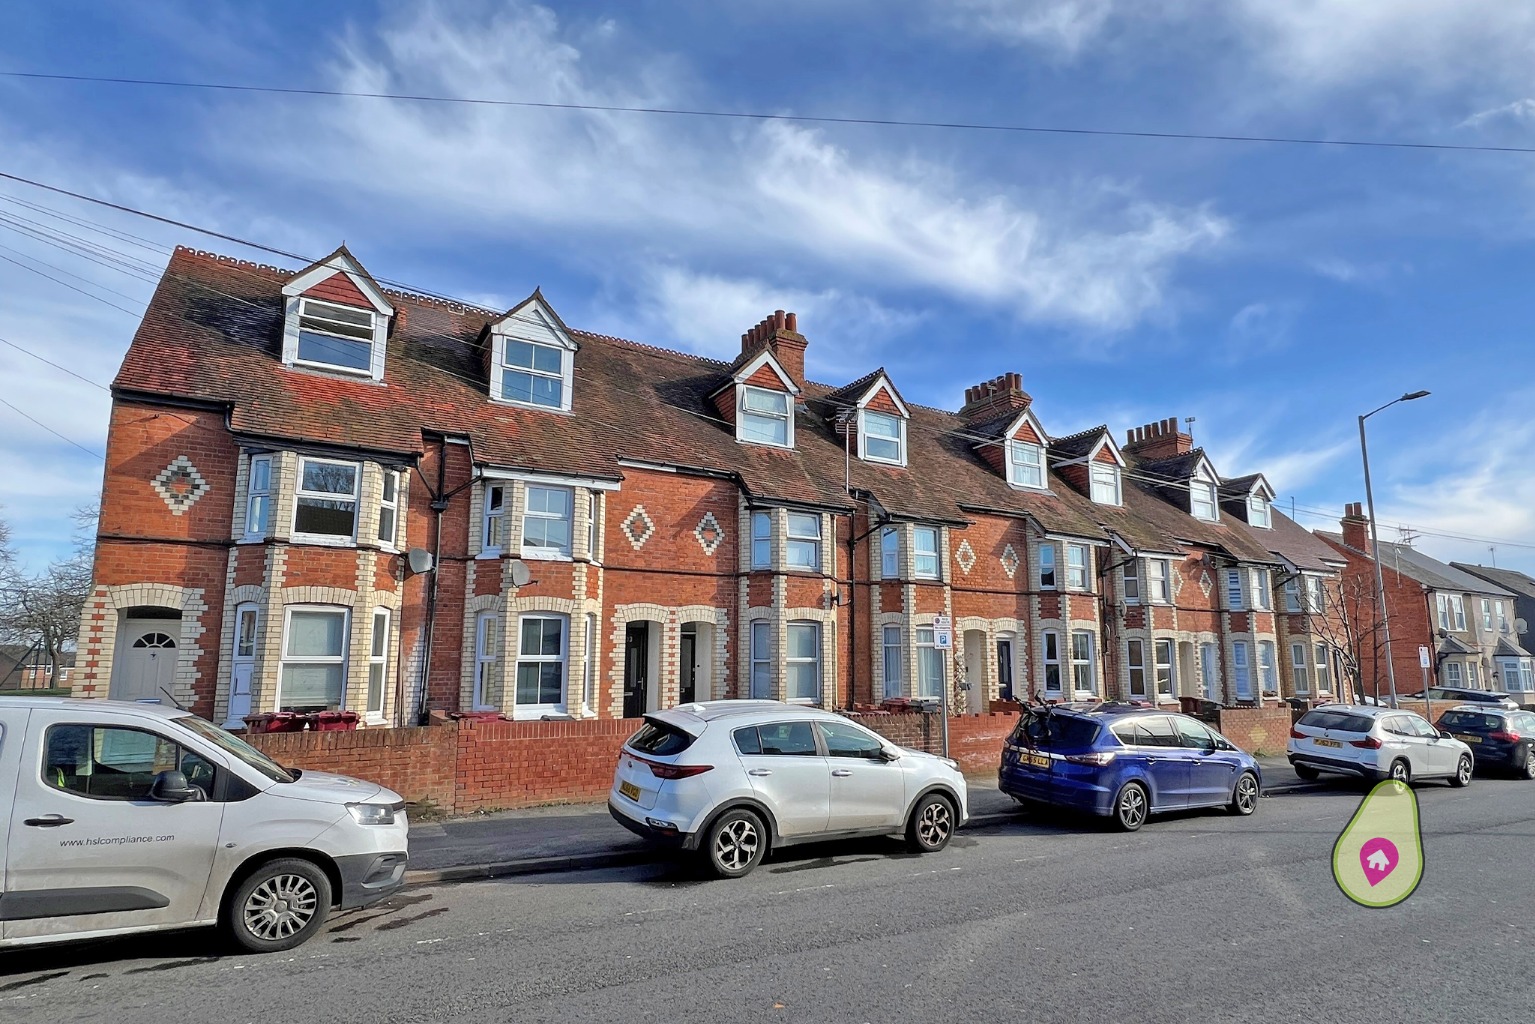 4 bed terraced house for sale in Norcot Road, Reading - Property Image 1